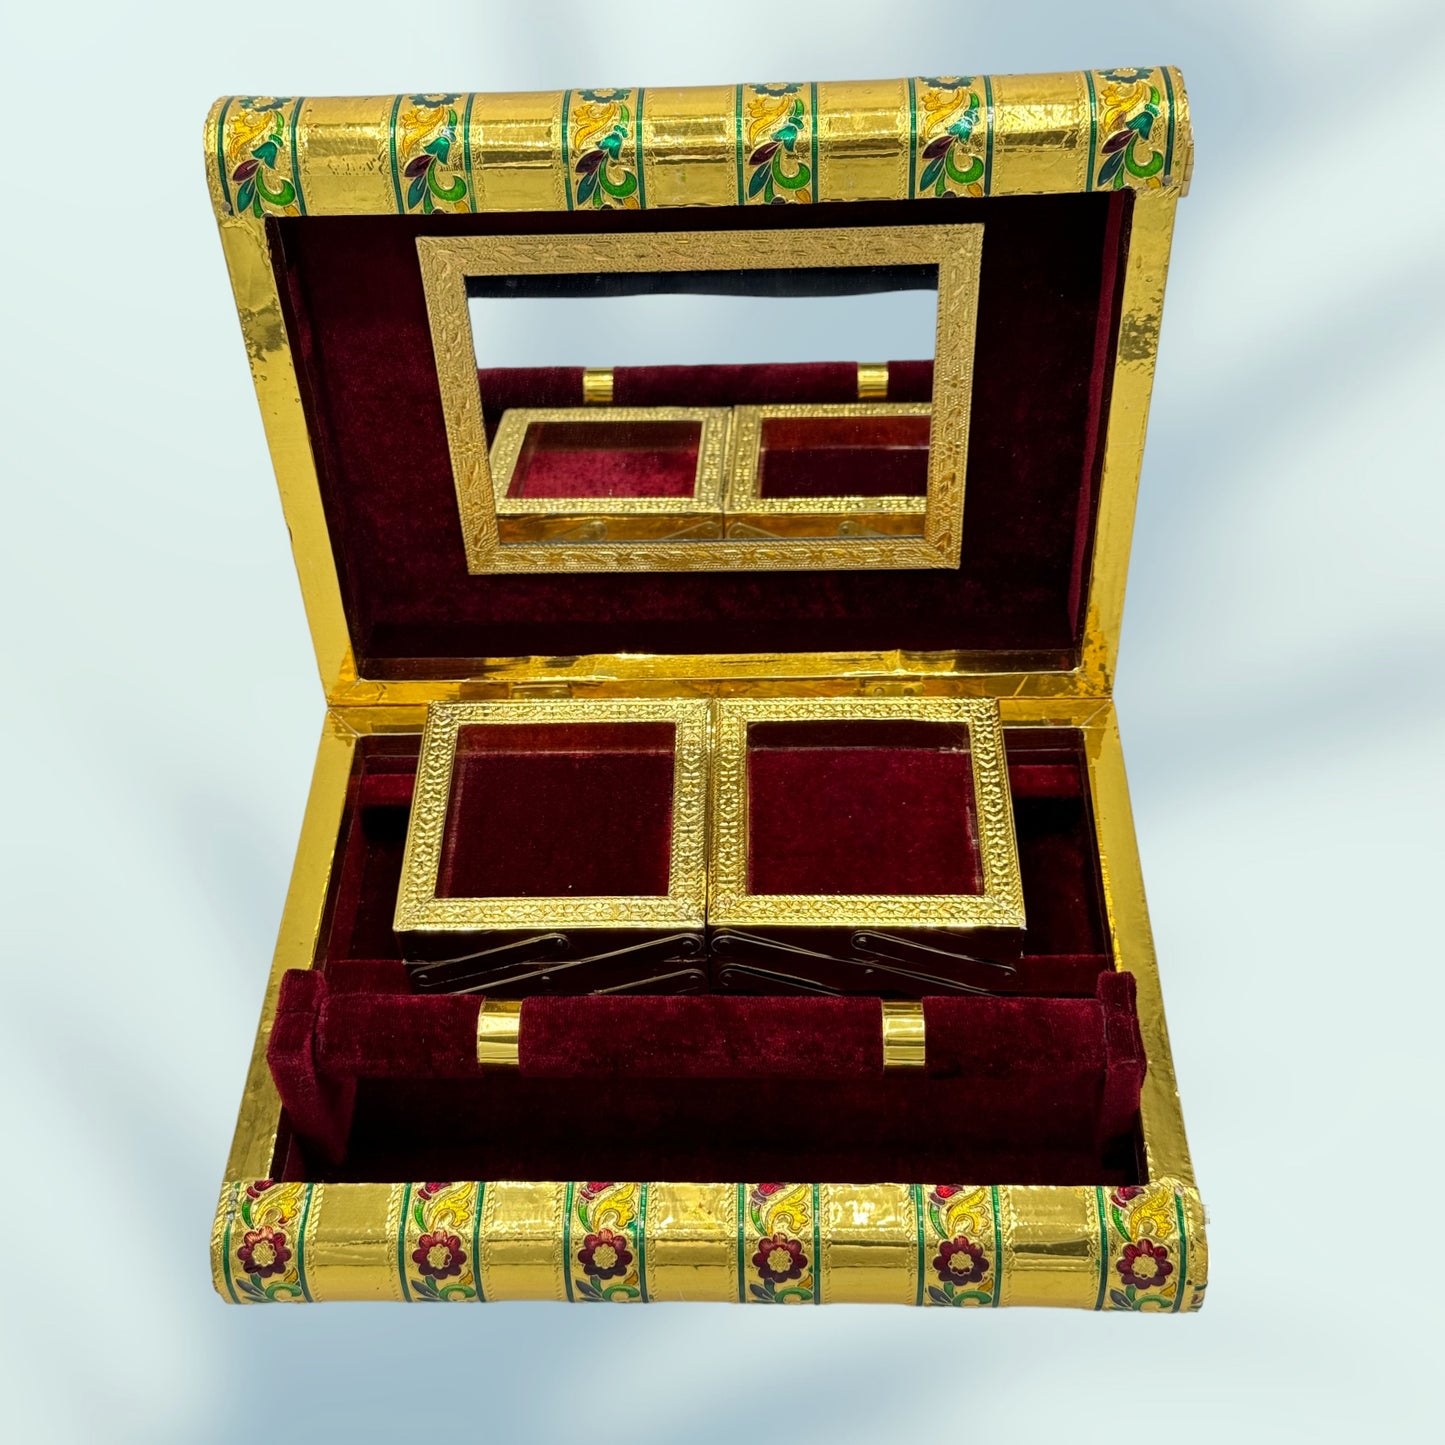 royal meenakari peacock box comes in a maroon red velvet lining as shown in this image 